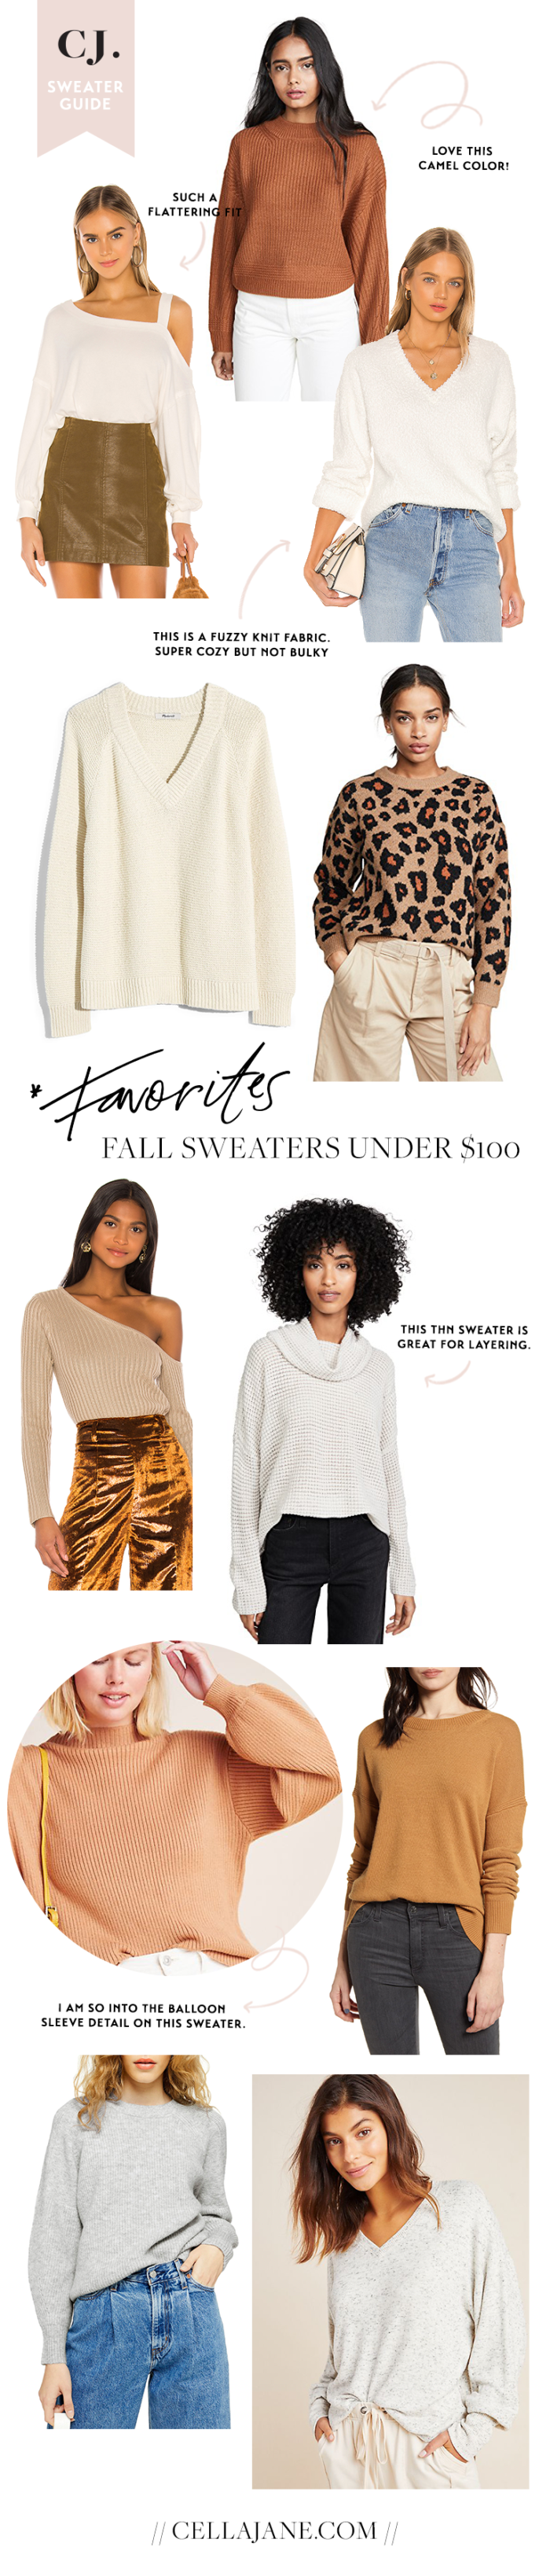 11 Fall Sweaters Under $100